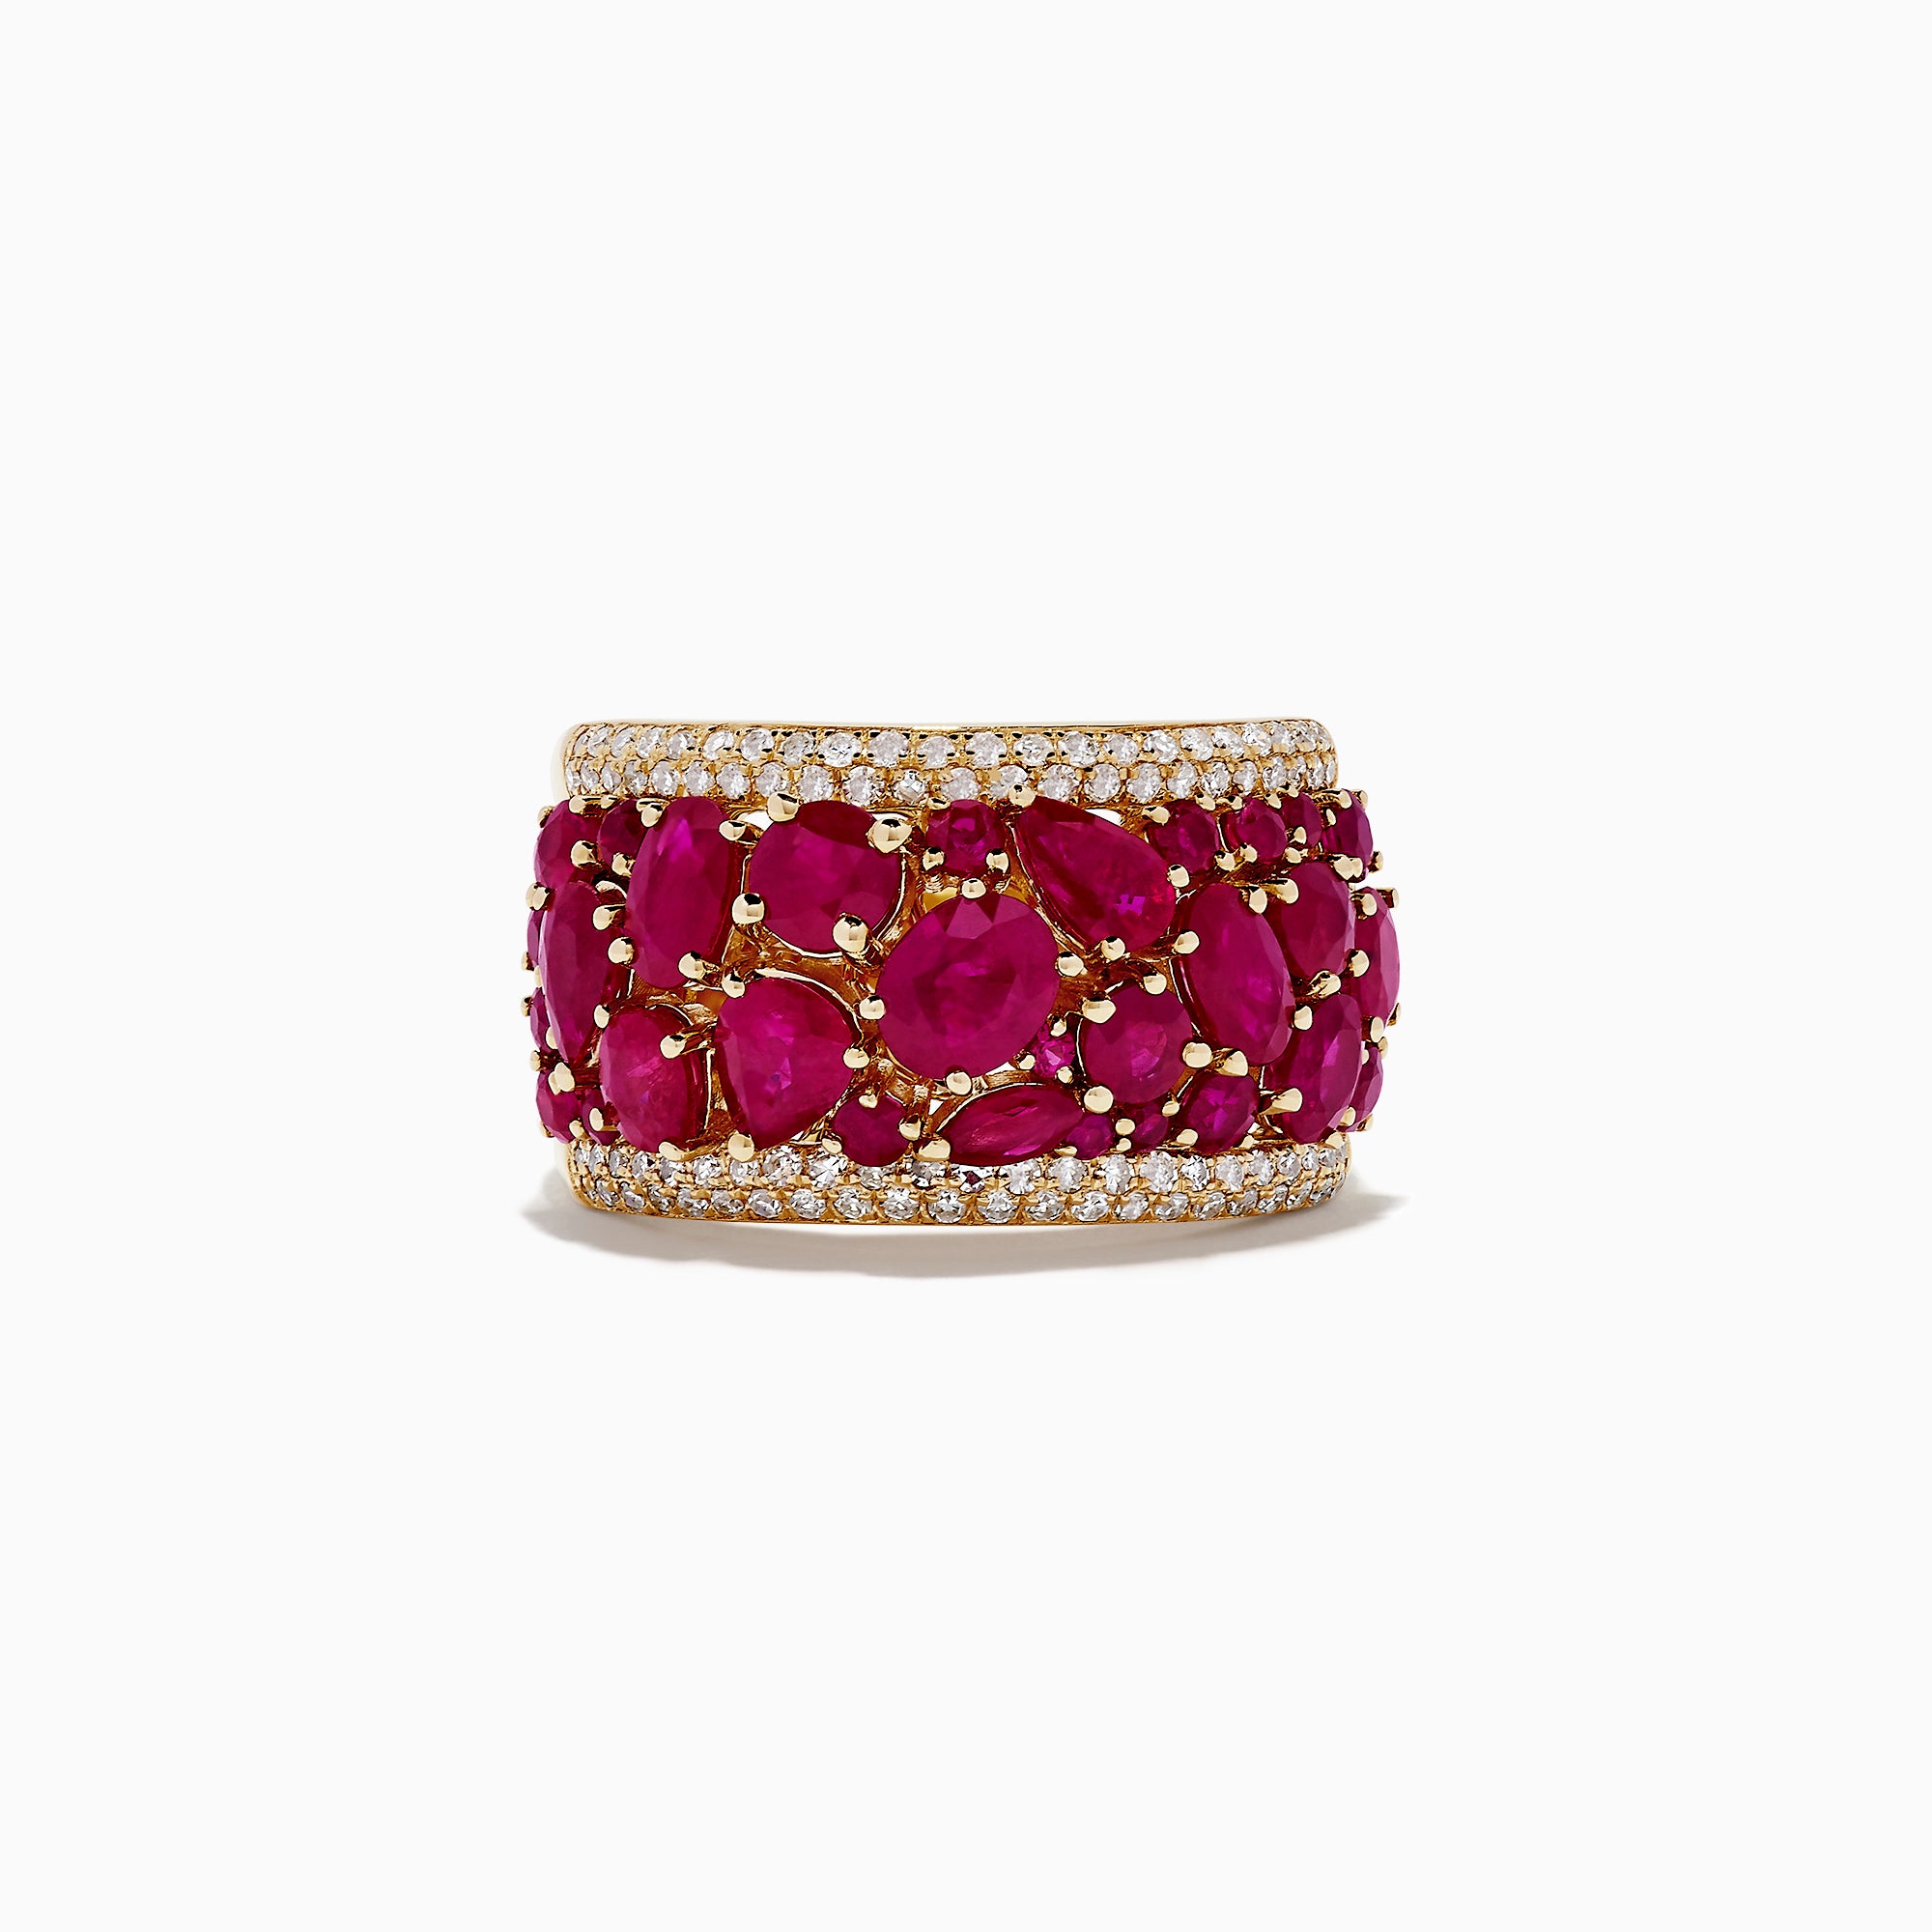 Effy Ruby Royale 14K Yellow Gold Ruby and Diamond Ring, 4.51 TCW